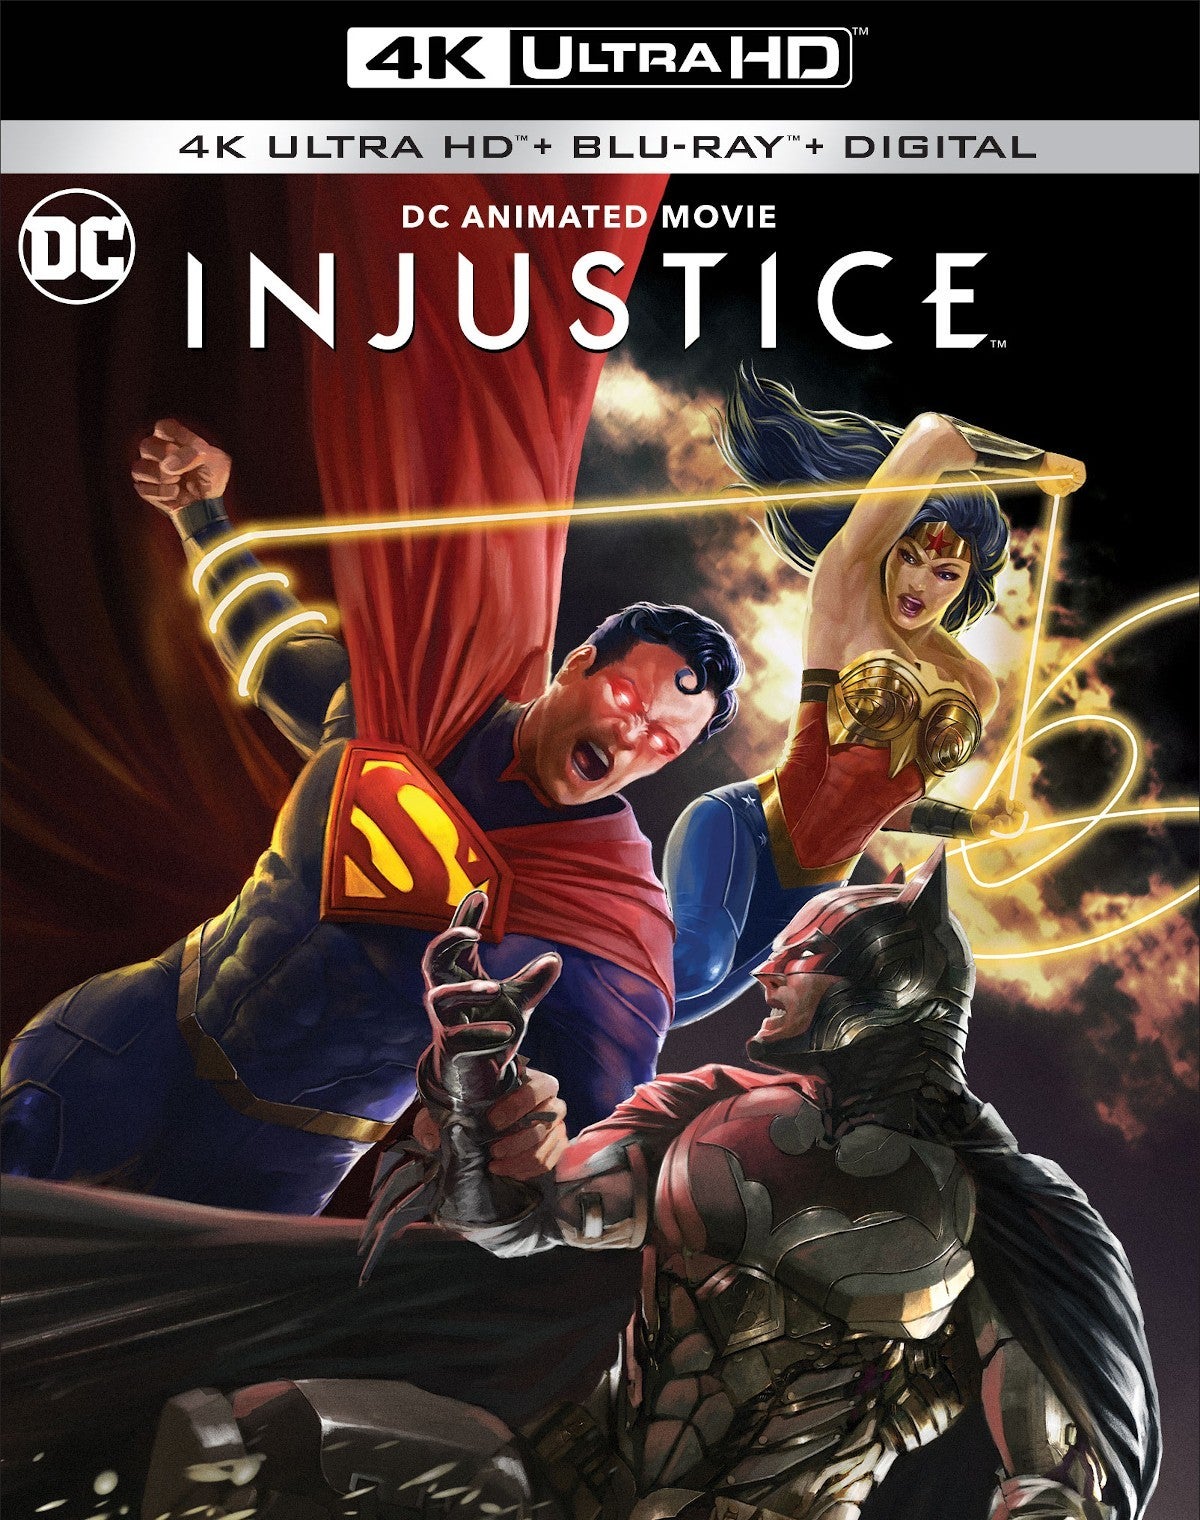 DC's Injustice Animated Movie Gets An October Release Date - TV Fandom